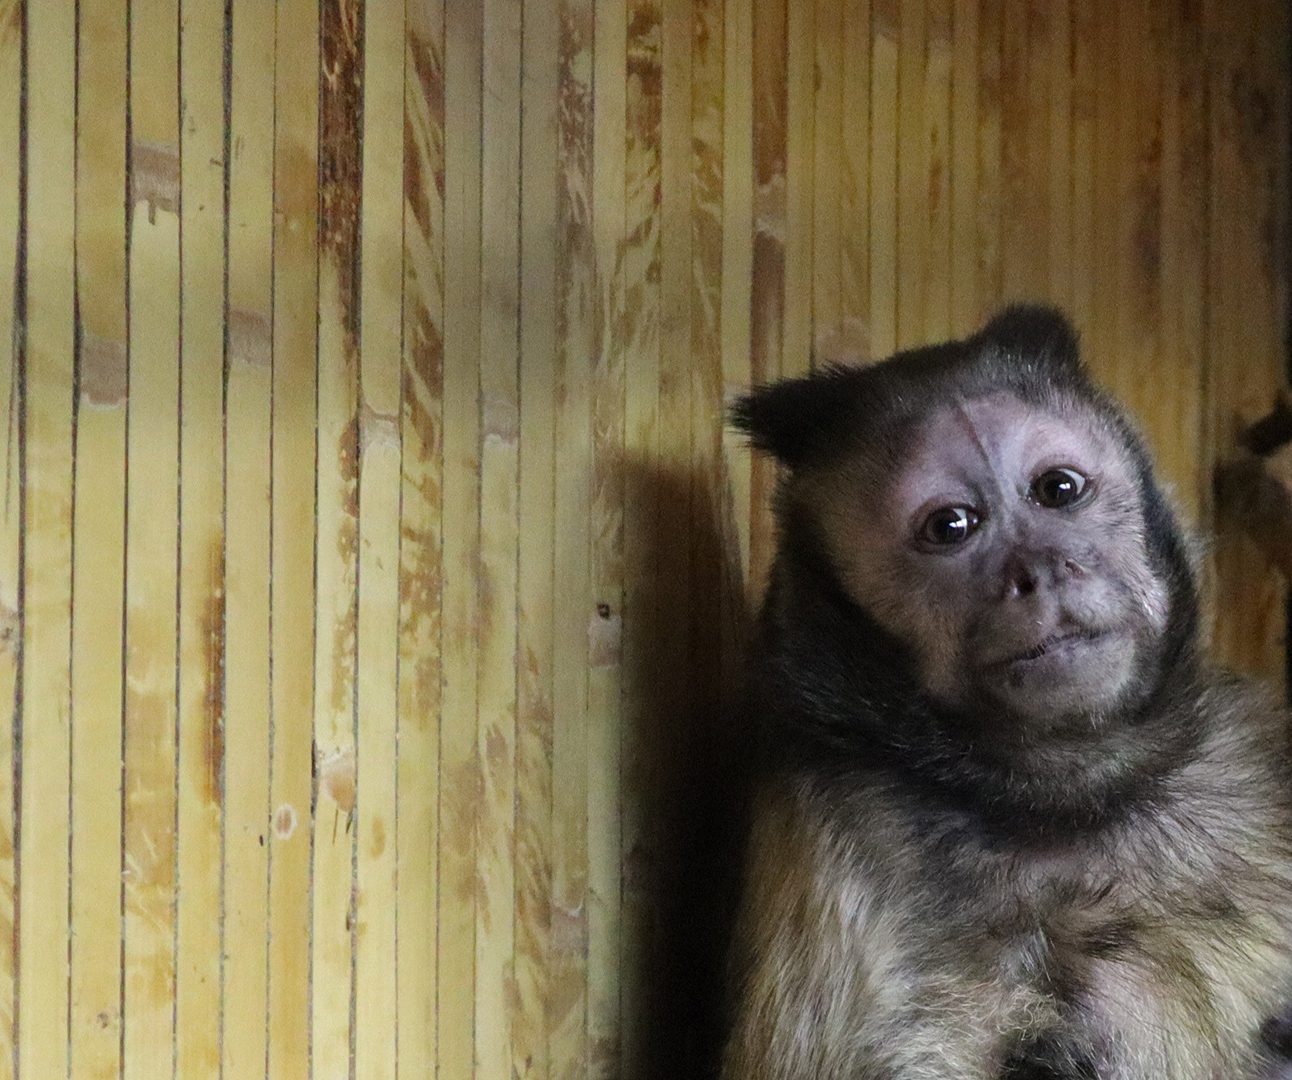 A brown capuchin monkey sits in the corner of a room with wooden board walls